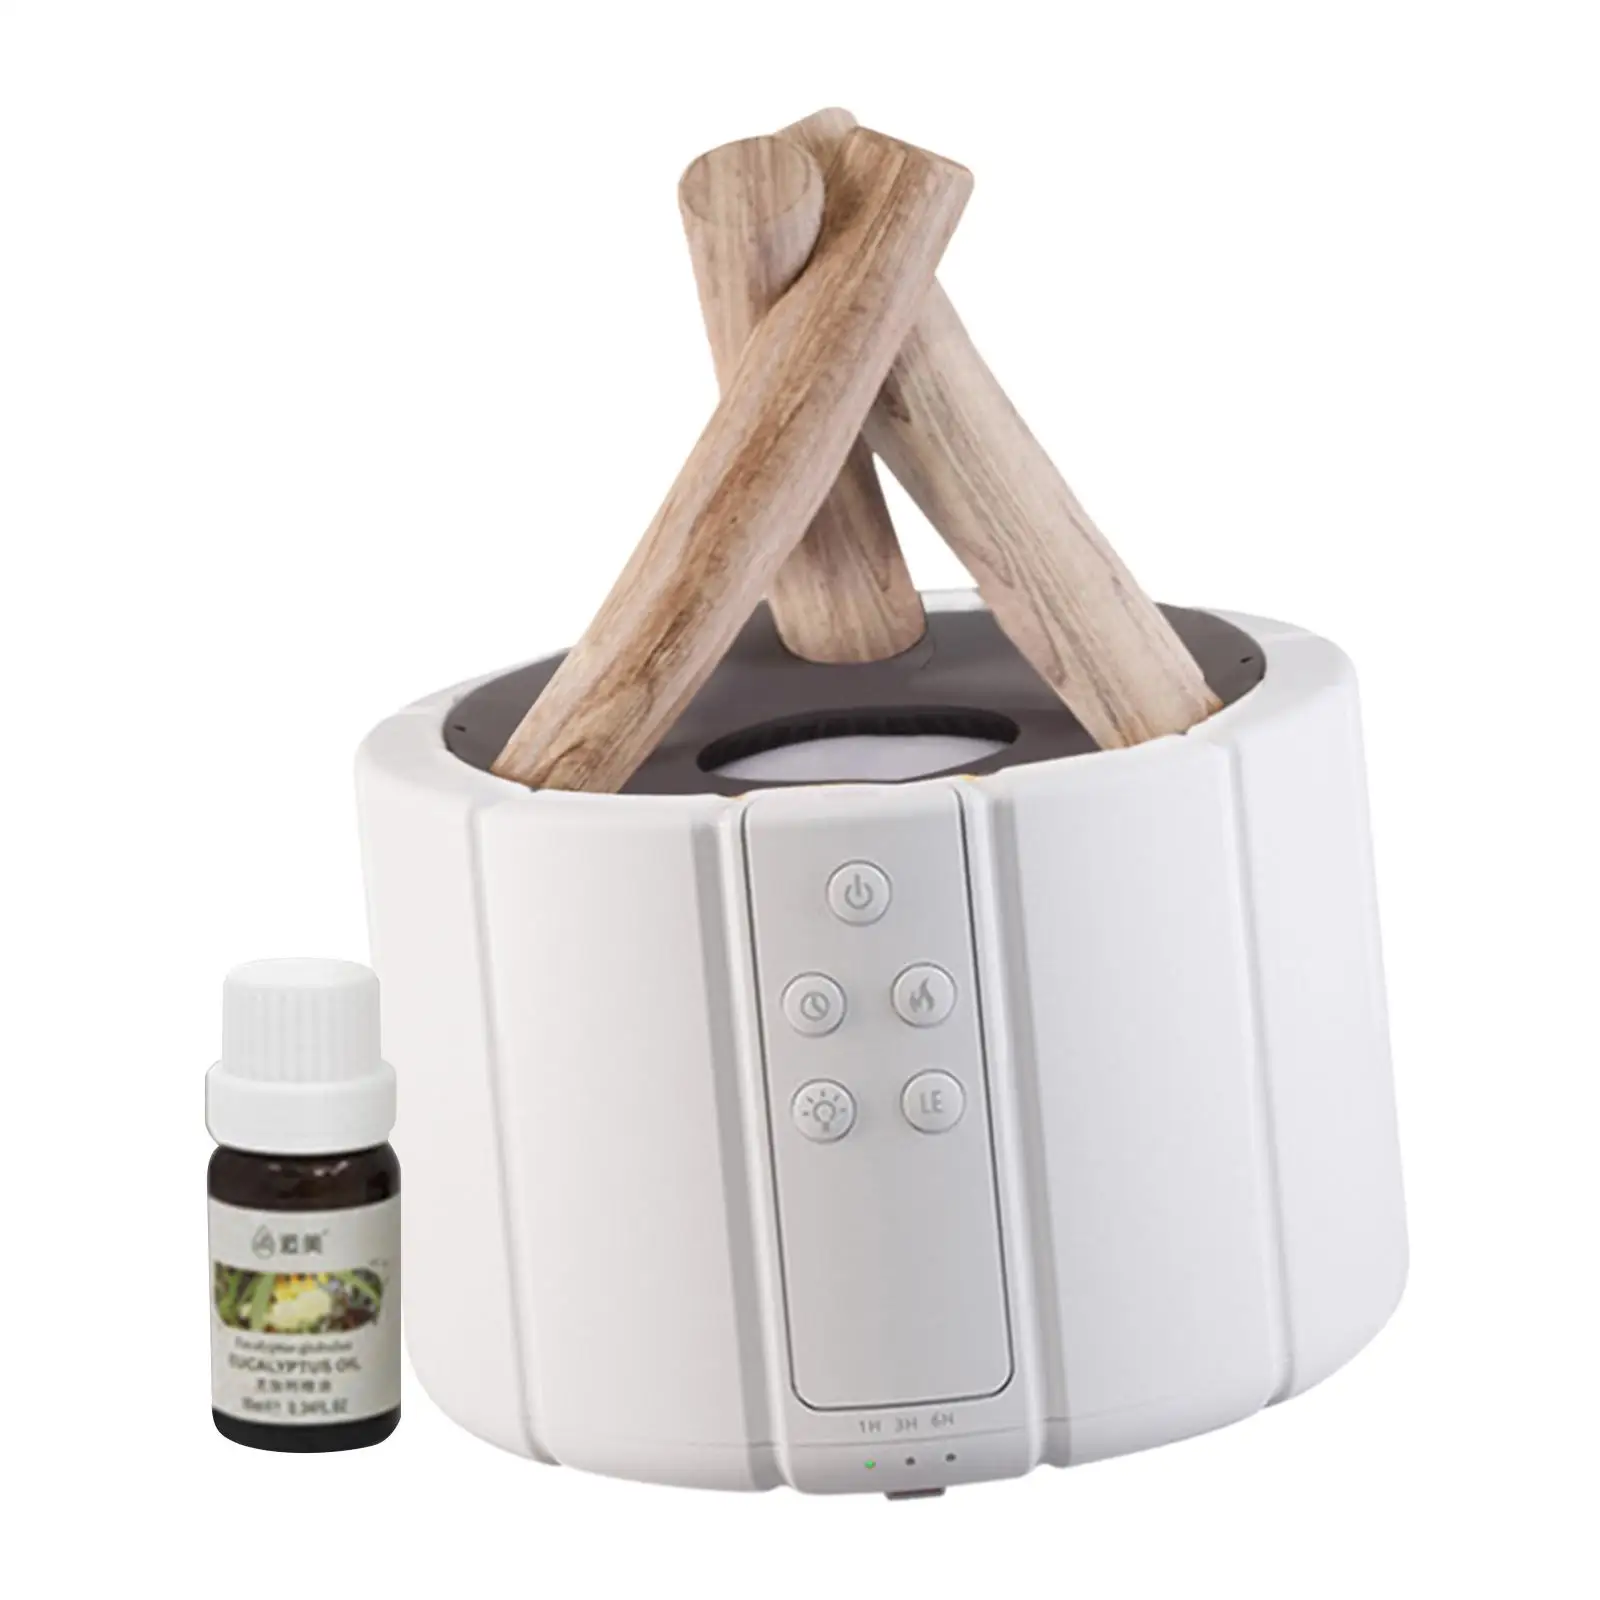 Flame Aroma Diffuser Flame Humidifier, 250ml, Quiet with Fireplace Gift Air